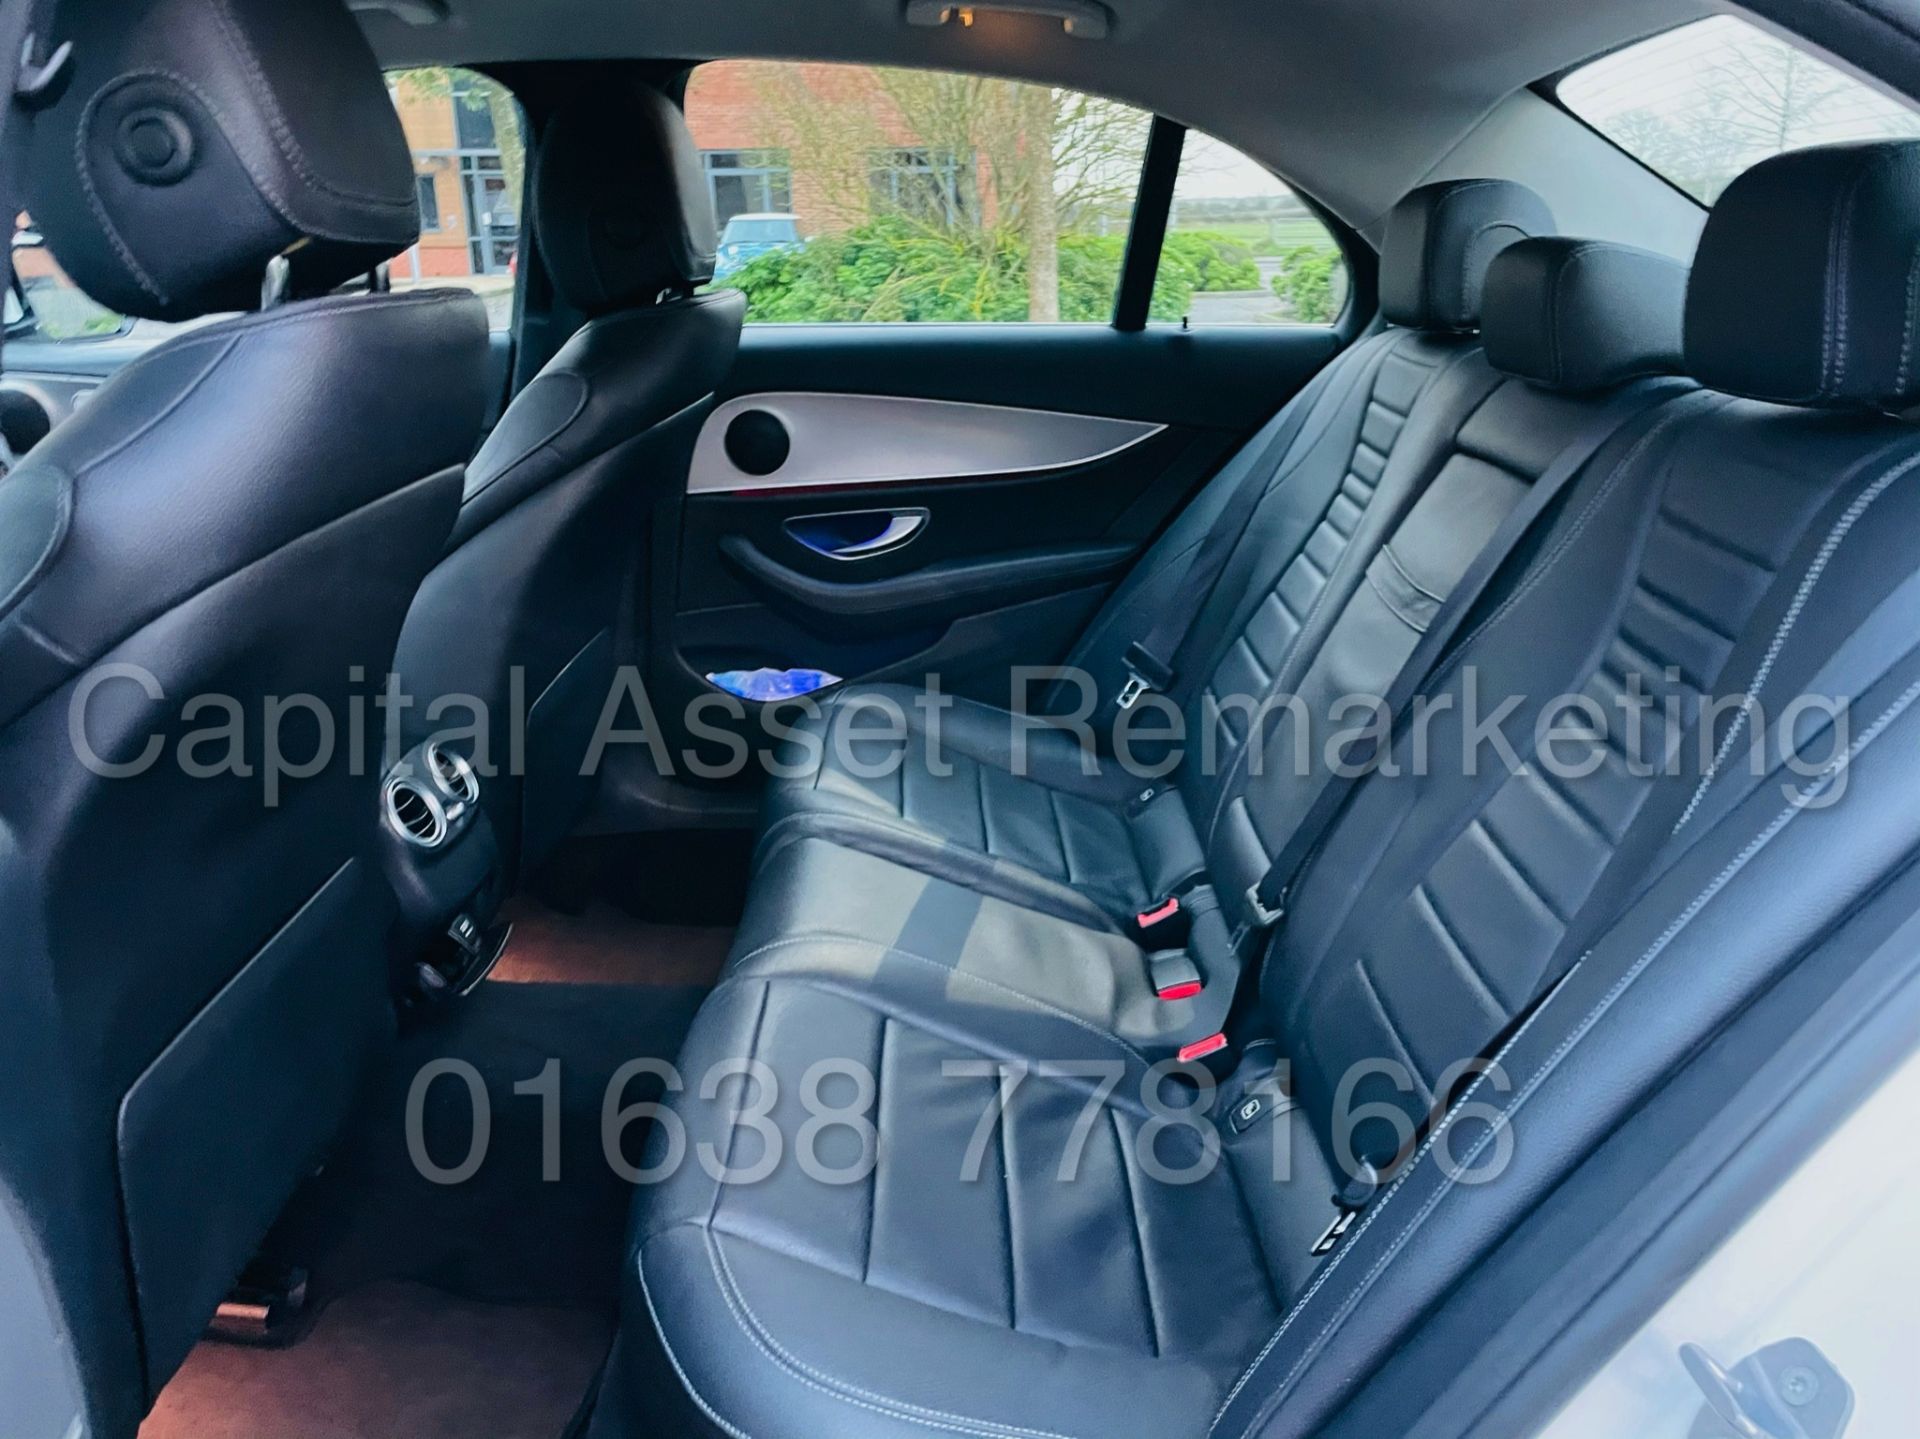 (ON SALE) MERCEDES-BENZ E220D *SALOON* (2018 - NEW MODEL) '9-G TRONIC AUTO - LEATHER - SAT NAV' - Image 26 of 50